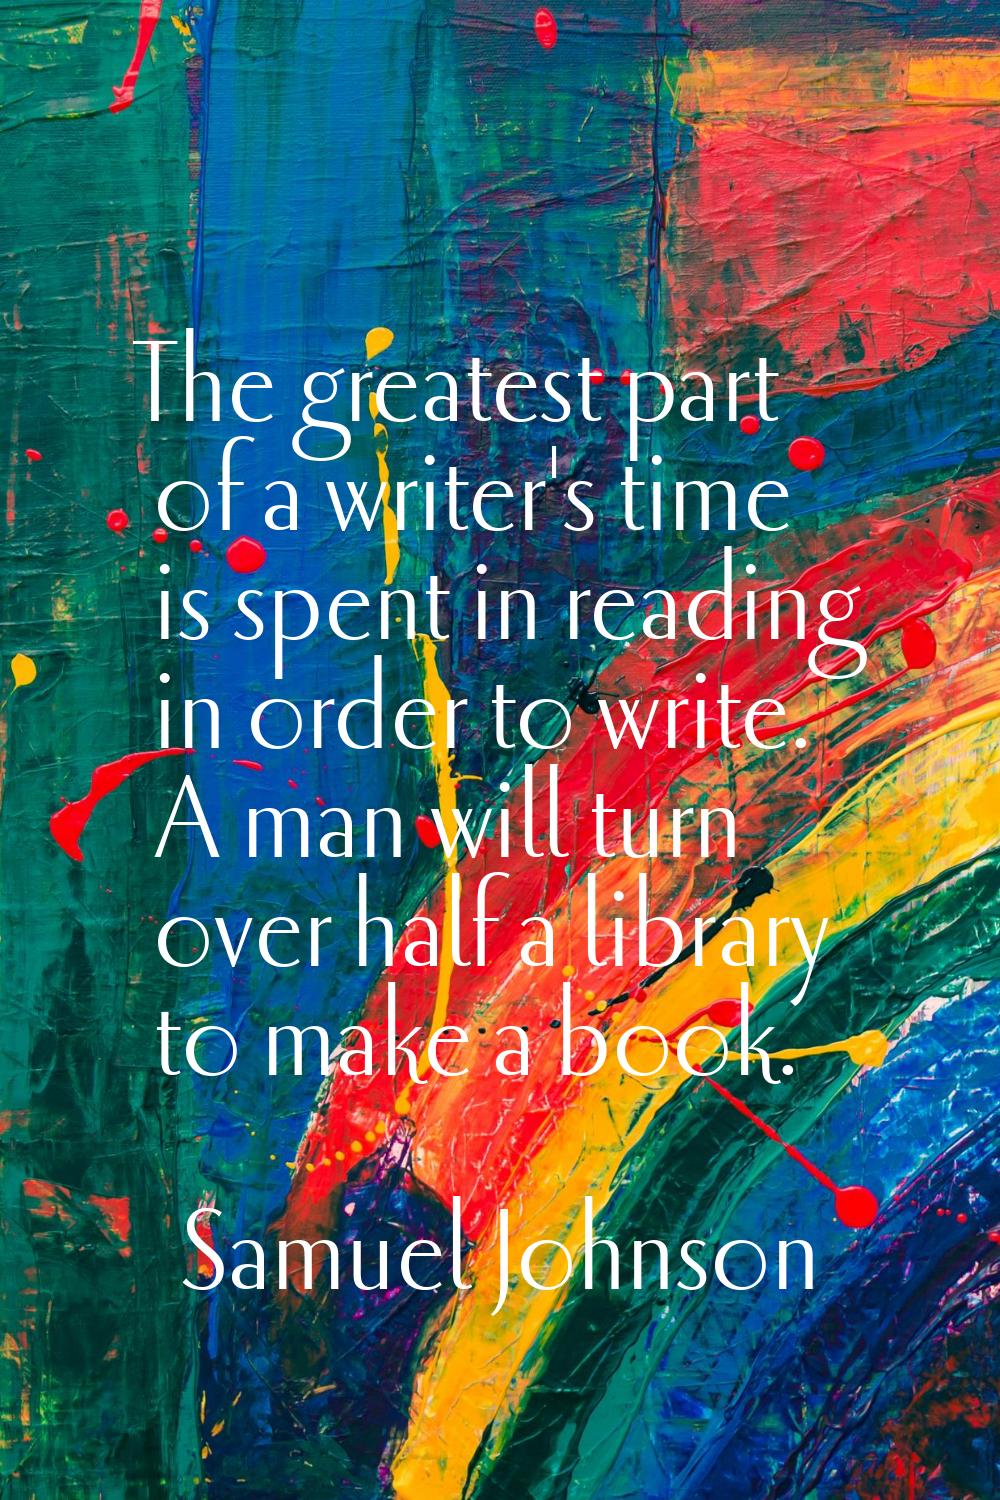 The greatest part of a writer's time is spent in reading in order to write. A man will turn over ha